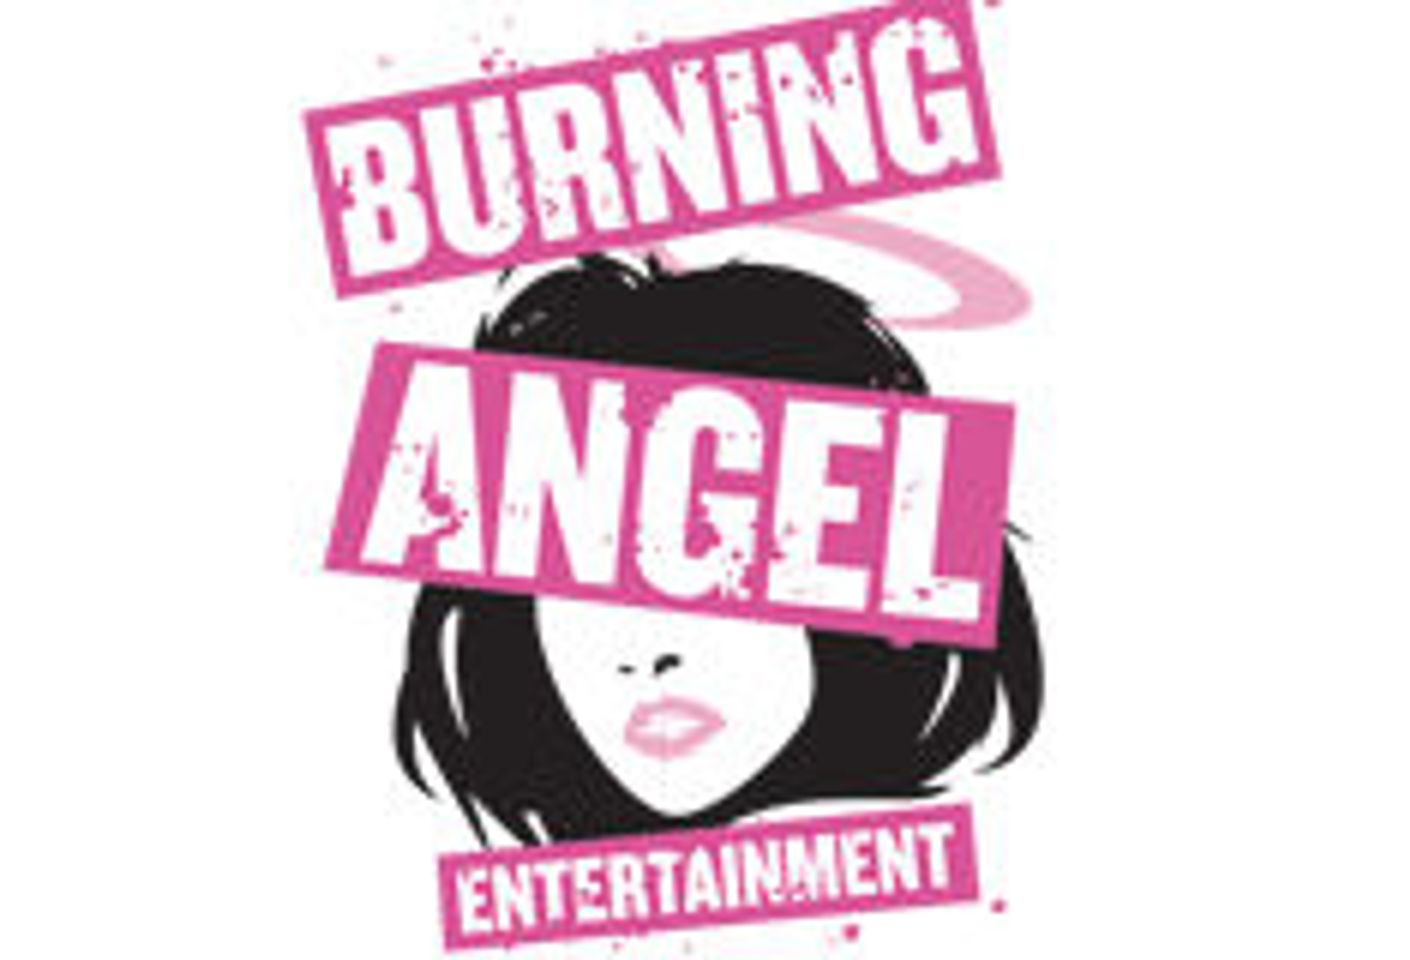 BurningAngel.com Now Featuring Weekly Webcam Shows